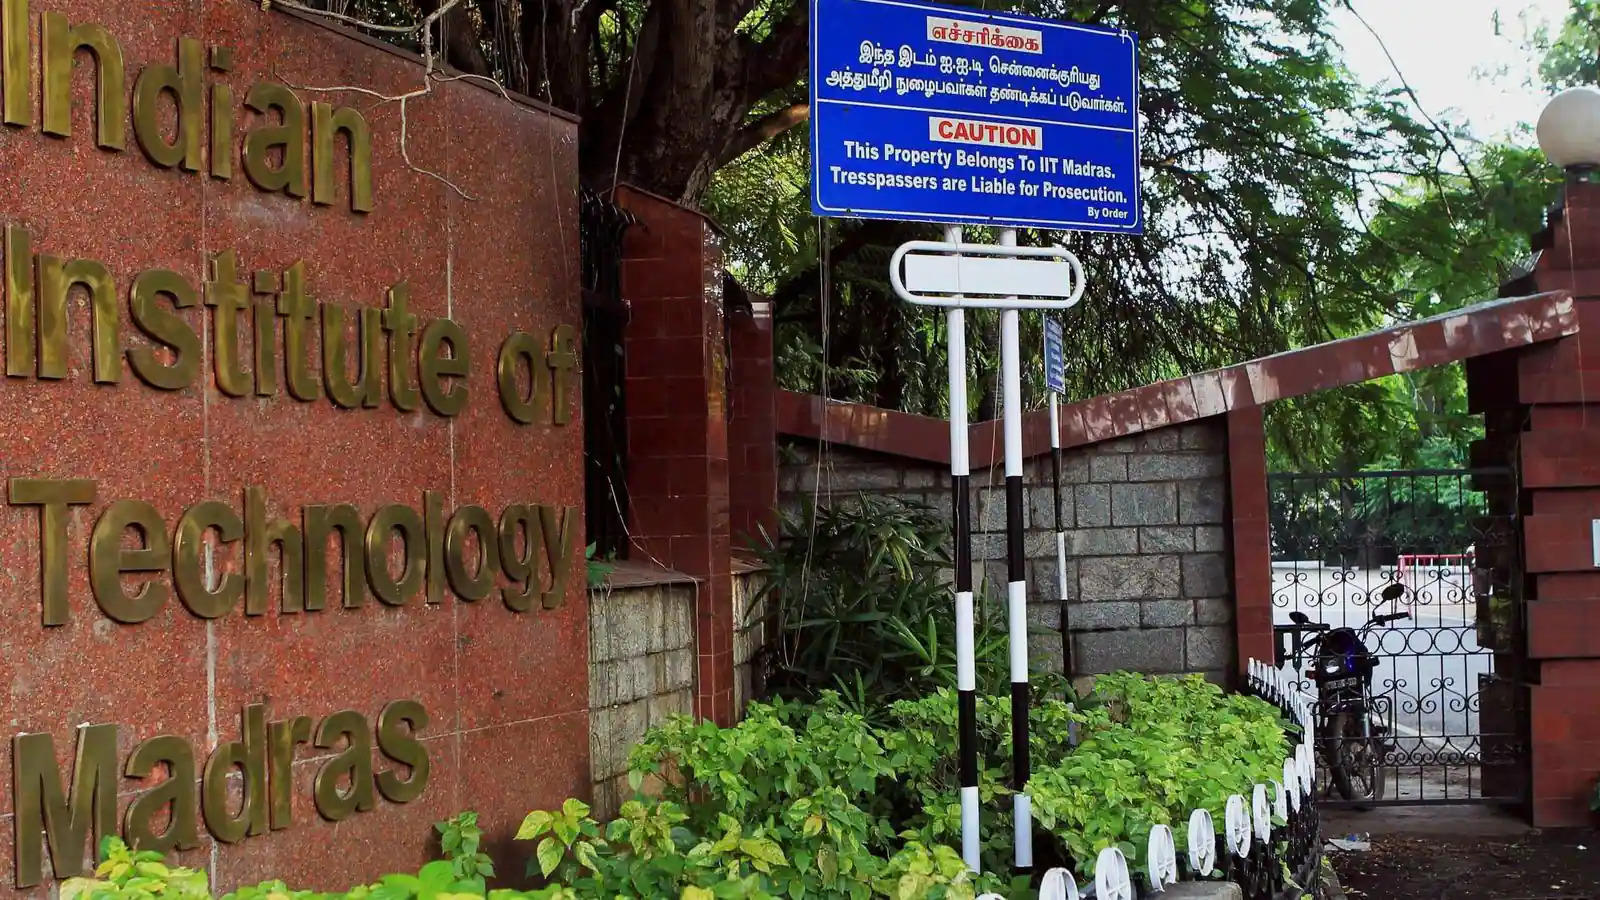 IIT Recruitment 2022: A great opportunity has emerged to get a job (Sarkari Naukri) in the Indian Institute of Technology Madras (IIT Madras). IIT has sought applications to fill the posts of Project Technician (IIT Recruitment 2022). Interested and eligible candidates who want to apply for these vacant posts (IIT Recruitment 2022), can apply by visiting the official website of IIT iitm.ac.in. The last date to apply for these posts (IIT Recruitment 2022) is 29 January 2023.  Apart from this, candidates can also apply for these posts (IIT Recruitment 2022) by directly clicking on this official link iitm.ac.in. If you want more detailed information related to this recruitment, then you can see and download the official notification (IIT Recruitment 2022) through this link IIT Recruitment 2022 Notification PDF. A total of 1 posts will be filled under this recruitment (IIT Recruitment 2022) process.  Important Dates for IIT Recruitment 2022  Starting date of online application -  Last date for online application – 31 January 2023  Details of posts for IIT Recruitment 2022  Total No. of Posts- 1  Location- Madras  Eligibility Criteria for IIT Recruitment 2022  Project Technician - Candidates should possess Diploma in Electronics and have experience.  Age Limit for IIT Recruitment 2022  according to the rules of the department  Salary for IIT Recruitment 2022  Project Technician - 18000-25000/-  Selection Process for IIT Recruitment 2022  Selection Process Candidates will be selected on the basis of written test.  How to apply for IIT Recruitment 2022  Interested and eligible candidates can apply through the official website of IIT (iitm.ac.in) till 31 January 2023. For detailed information in this regard, refer to the official notification given above.     If you want to get a government job, then apply for this recruitment before the last date and fulfill your dream of getting a government job. You can visit naukrinama.com for more such latest government jobs information.